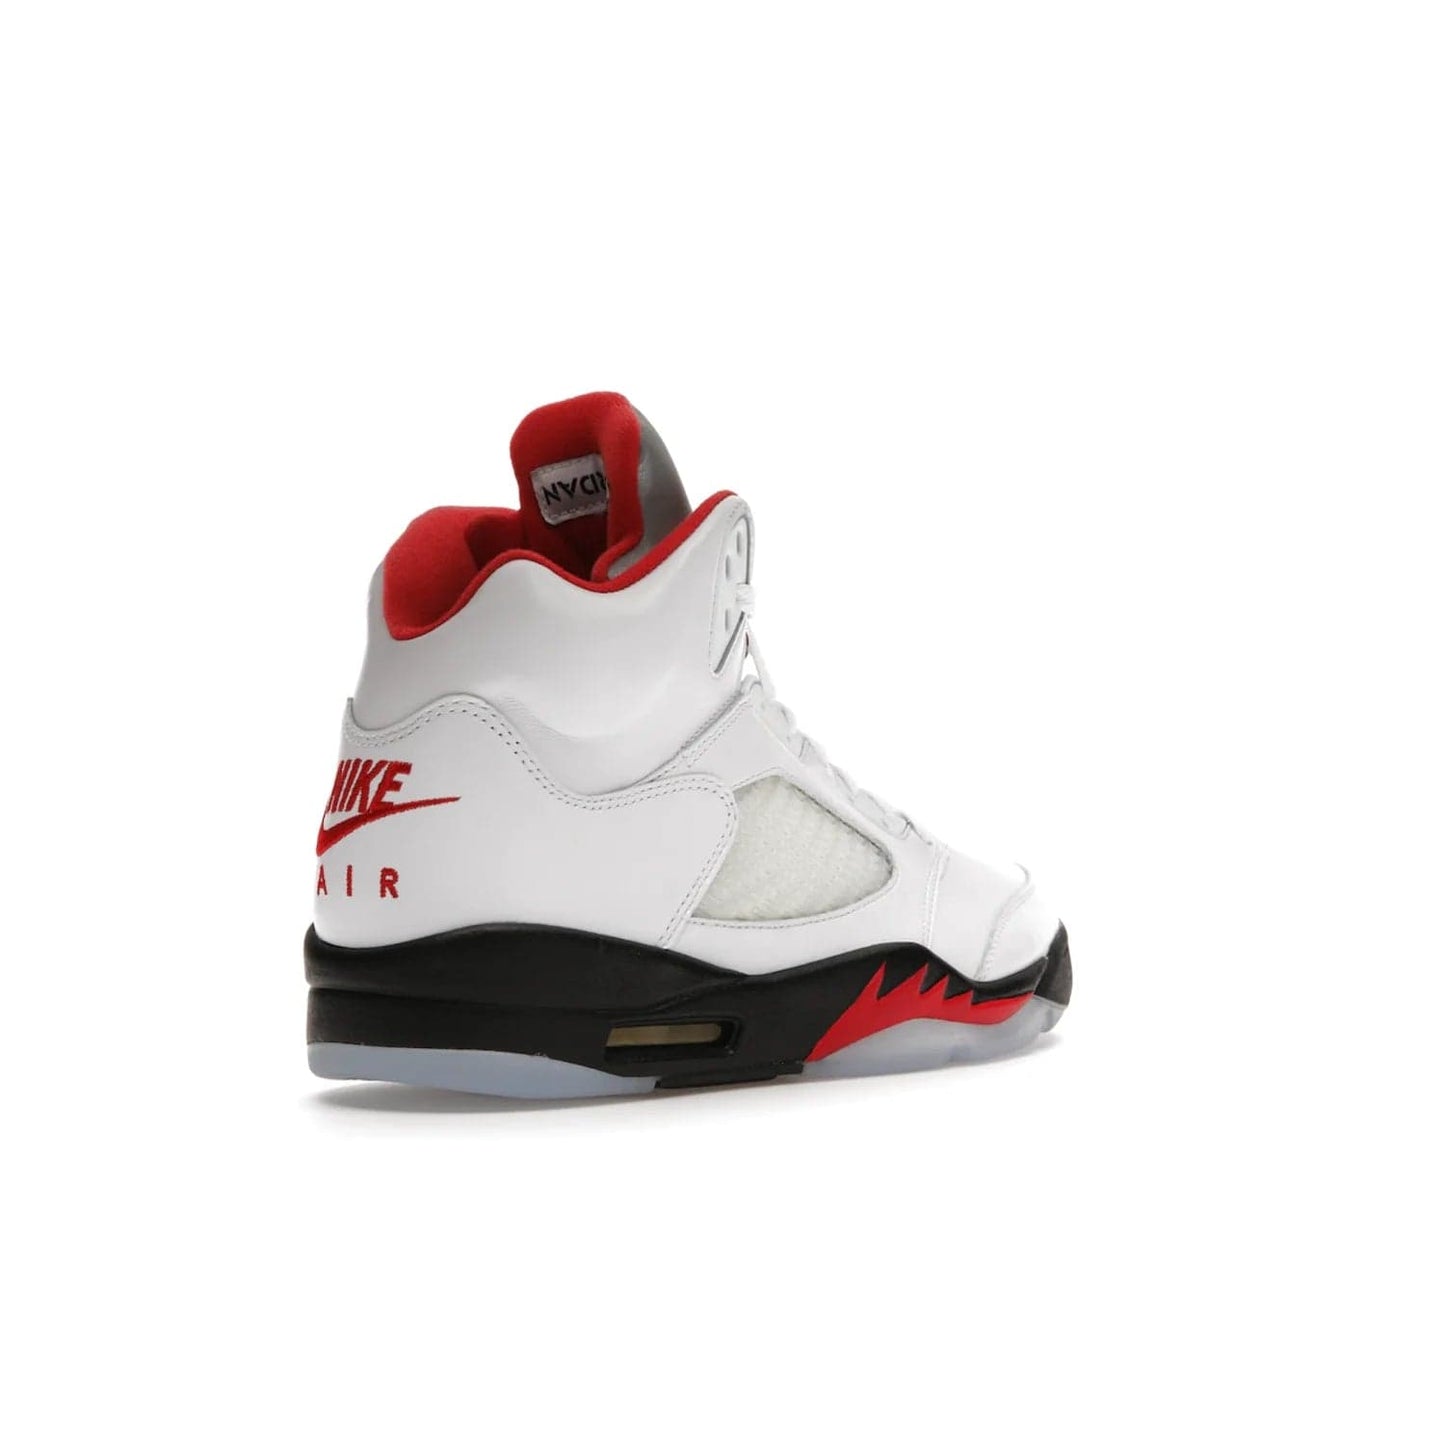 Jordan 5 Retro Fire Red Silver Tongue (2020) - Image 32 - Only at www.BallersClubKickz.com - Experience classic styling with the Jordan 5 Retro Fire Red Silver Tongue (2020). Features a white leather upper, 3M reflective tongue, midsole colorblocking, and an icy translucent outsole. Now available, upgrade your shoe collection today.